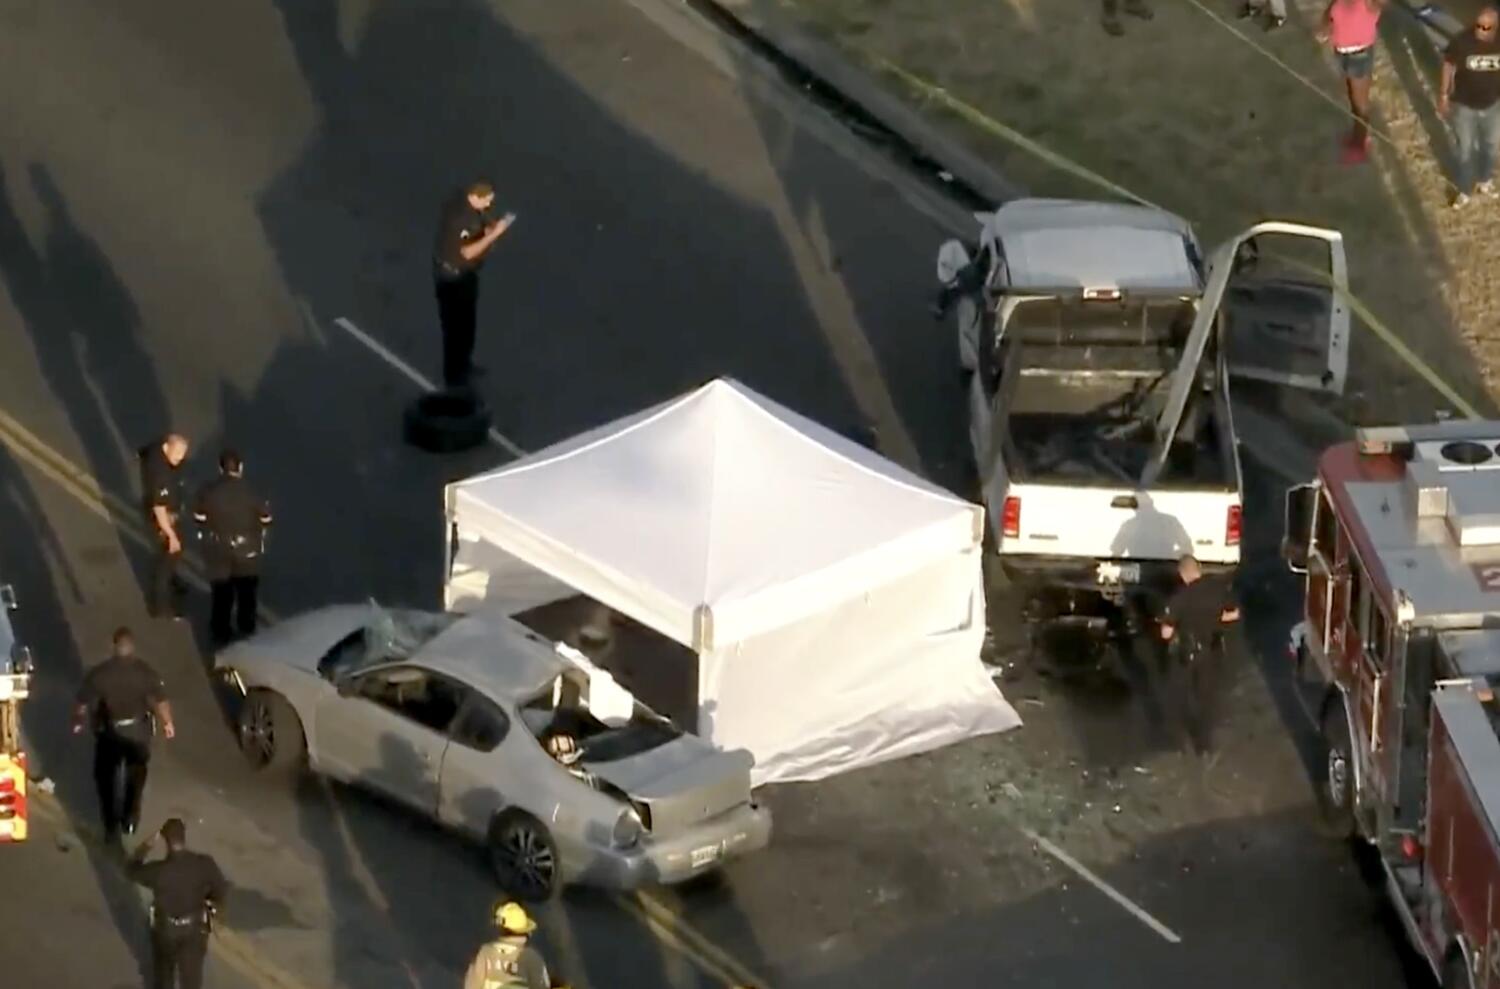 12-year-old girl killed, nine others injured in multi-car crash in South L.A.